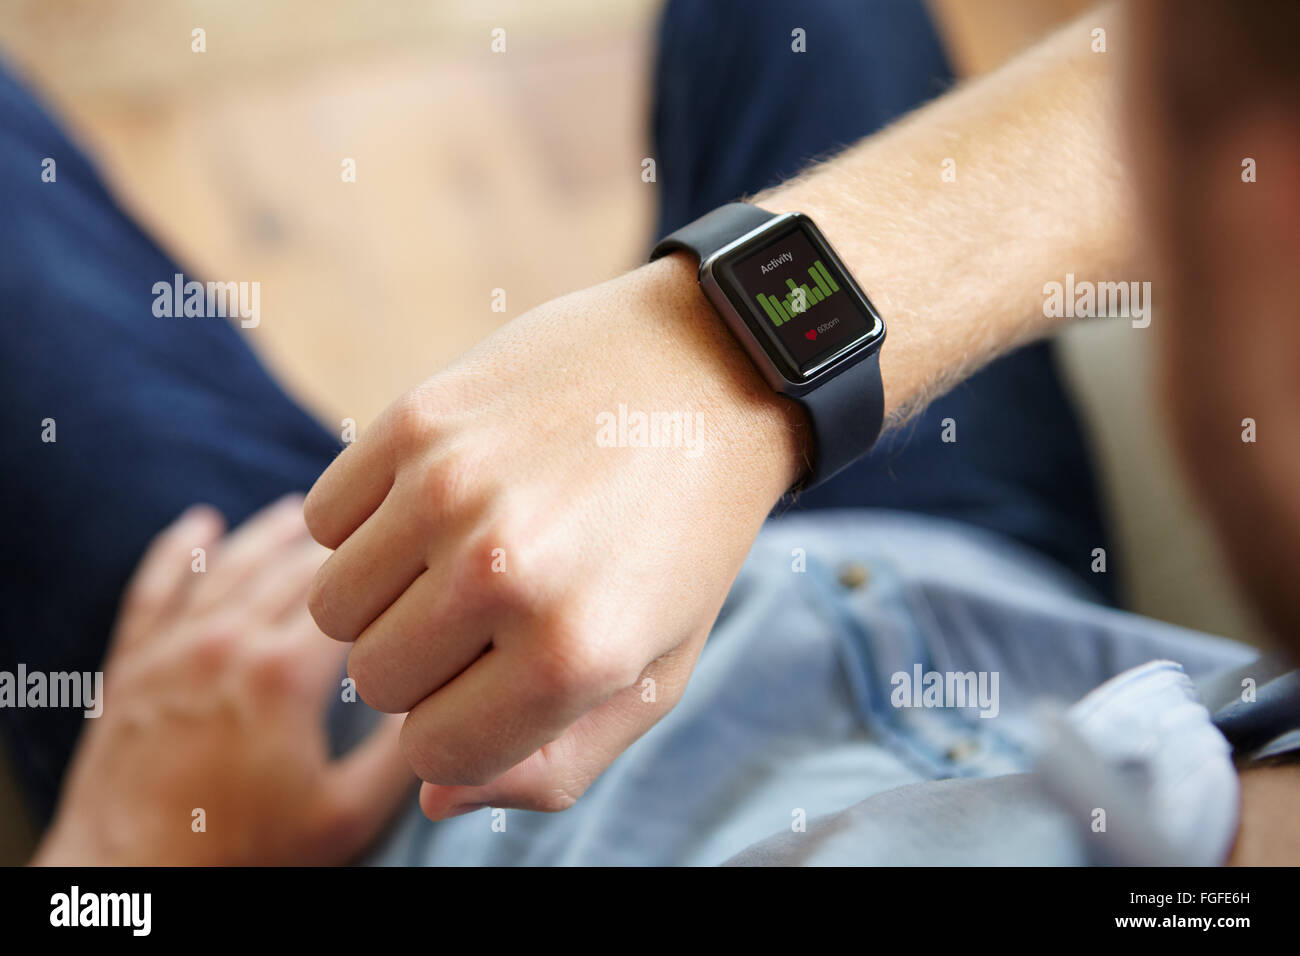 Man Looking At Health Application Software On Smart Watch Stock Photo